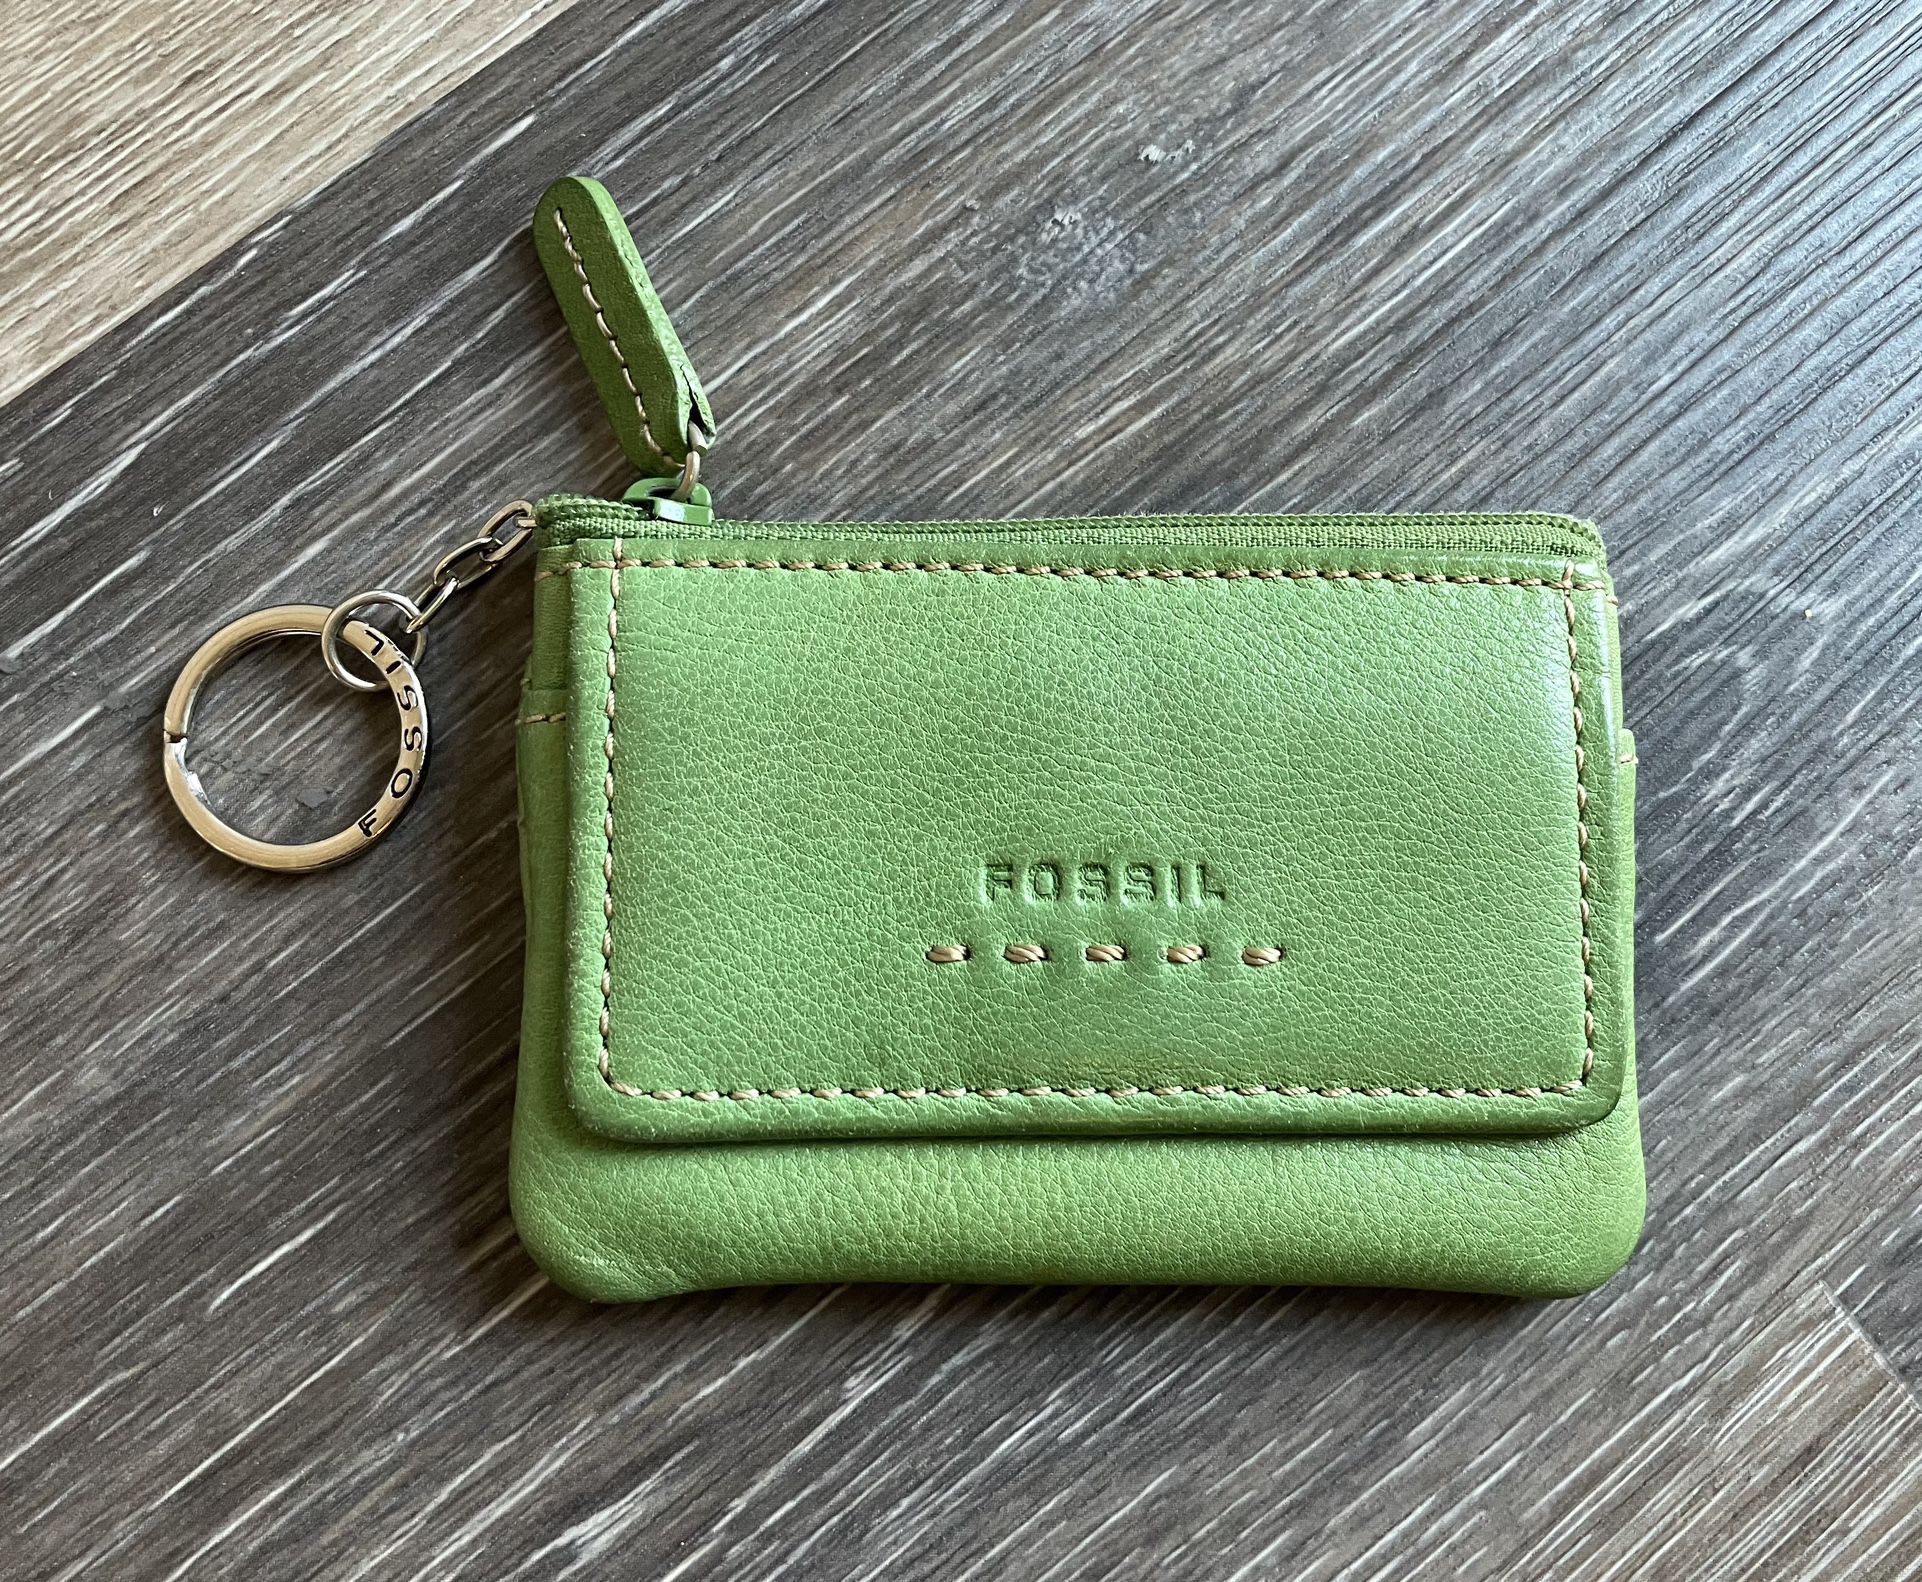 Fossil Mini Leather Wallet Coin Purse Keychain